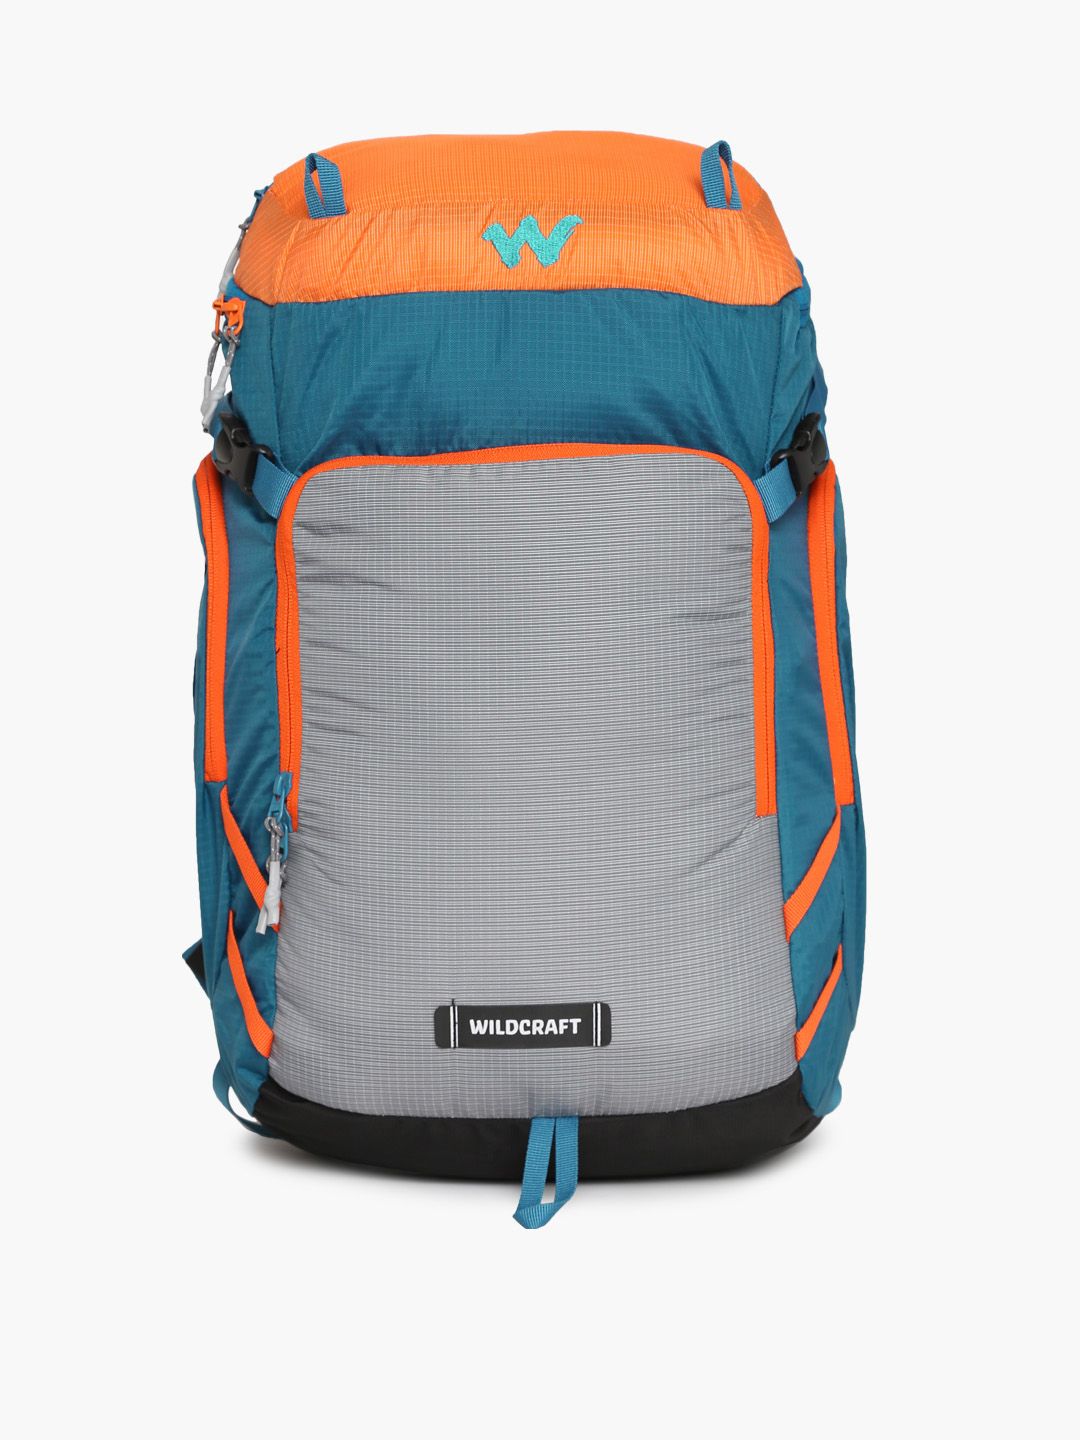 Wildcraft Unisex Grey & Blue Colourblocked Backpack Price in India